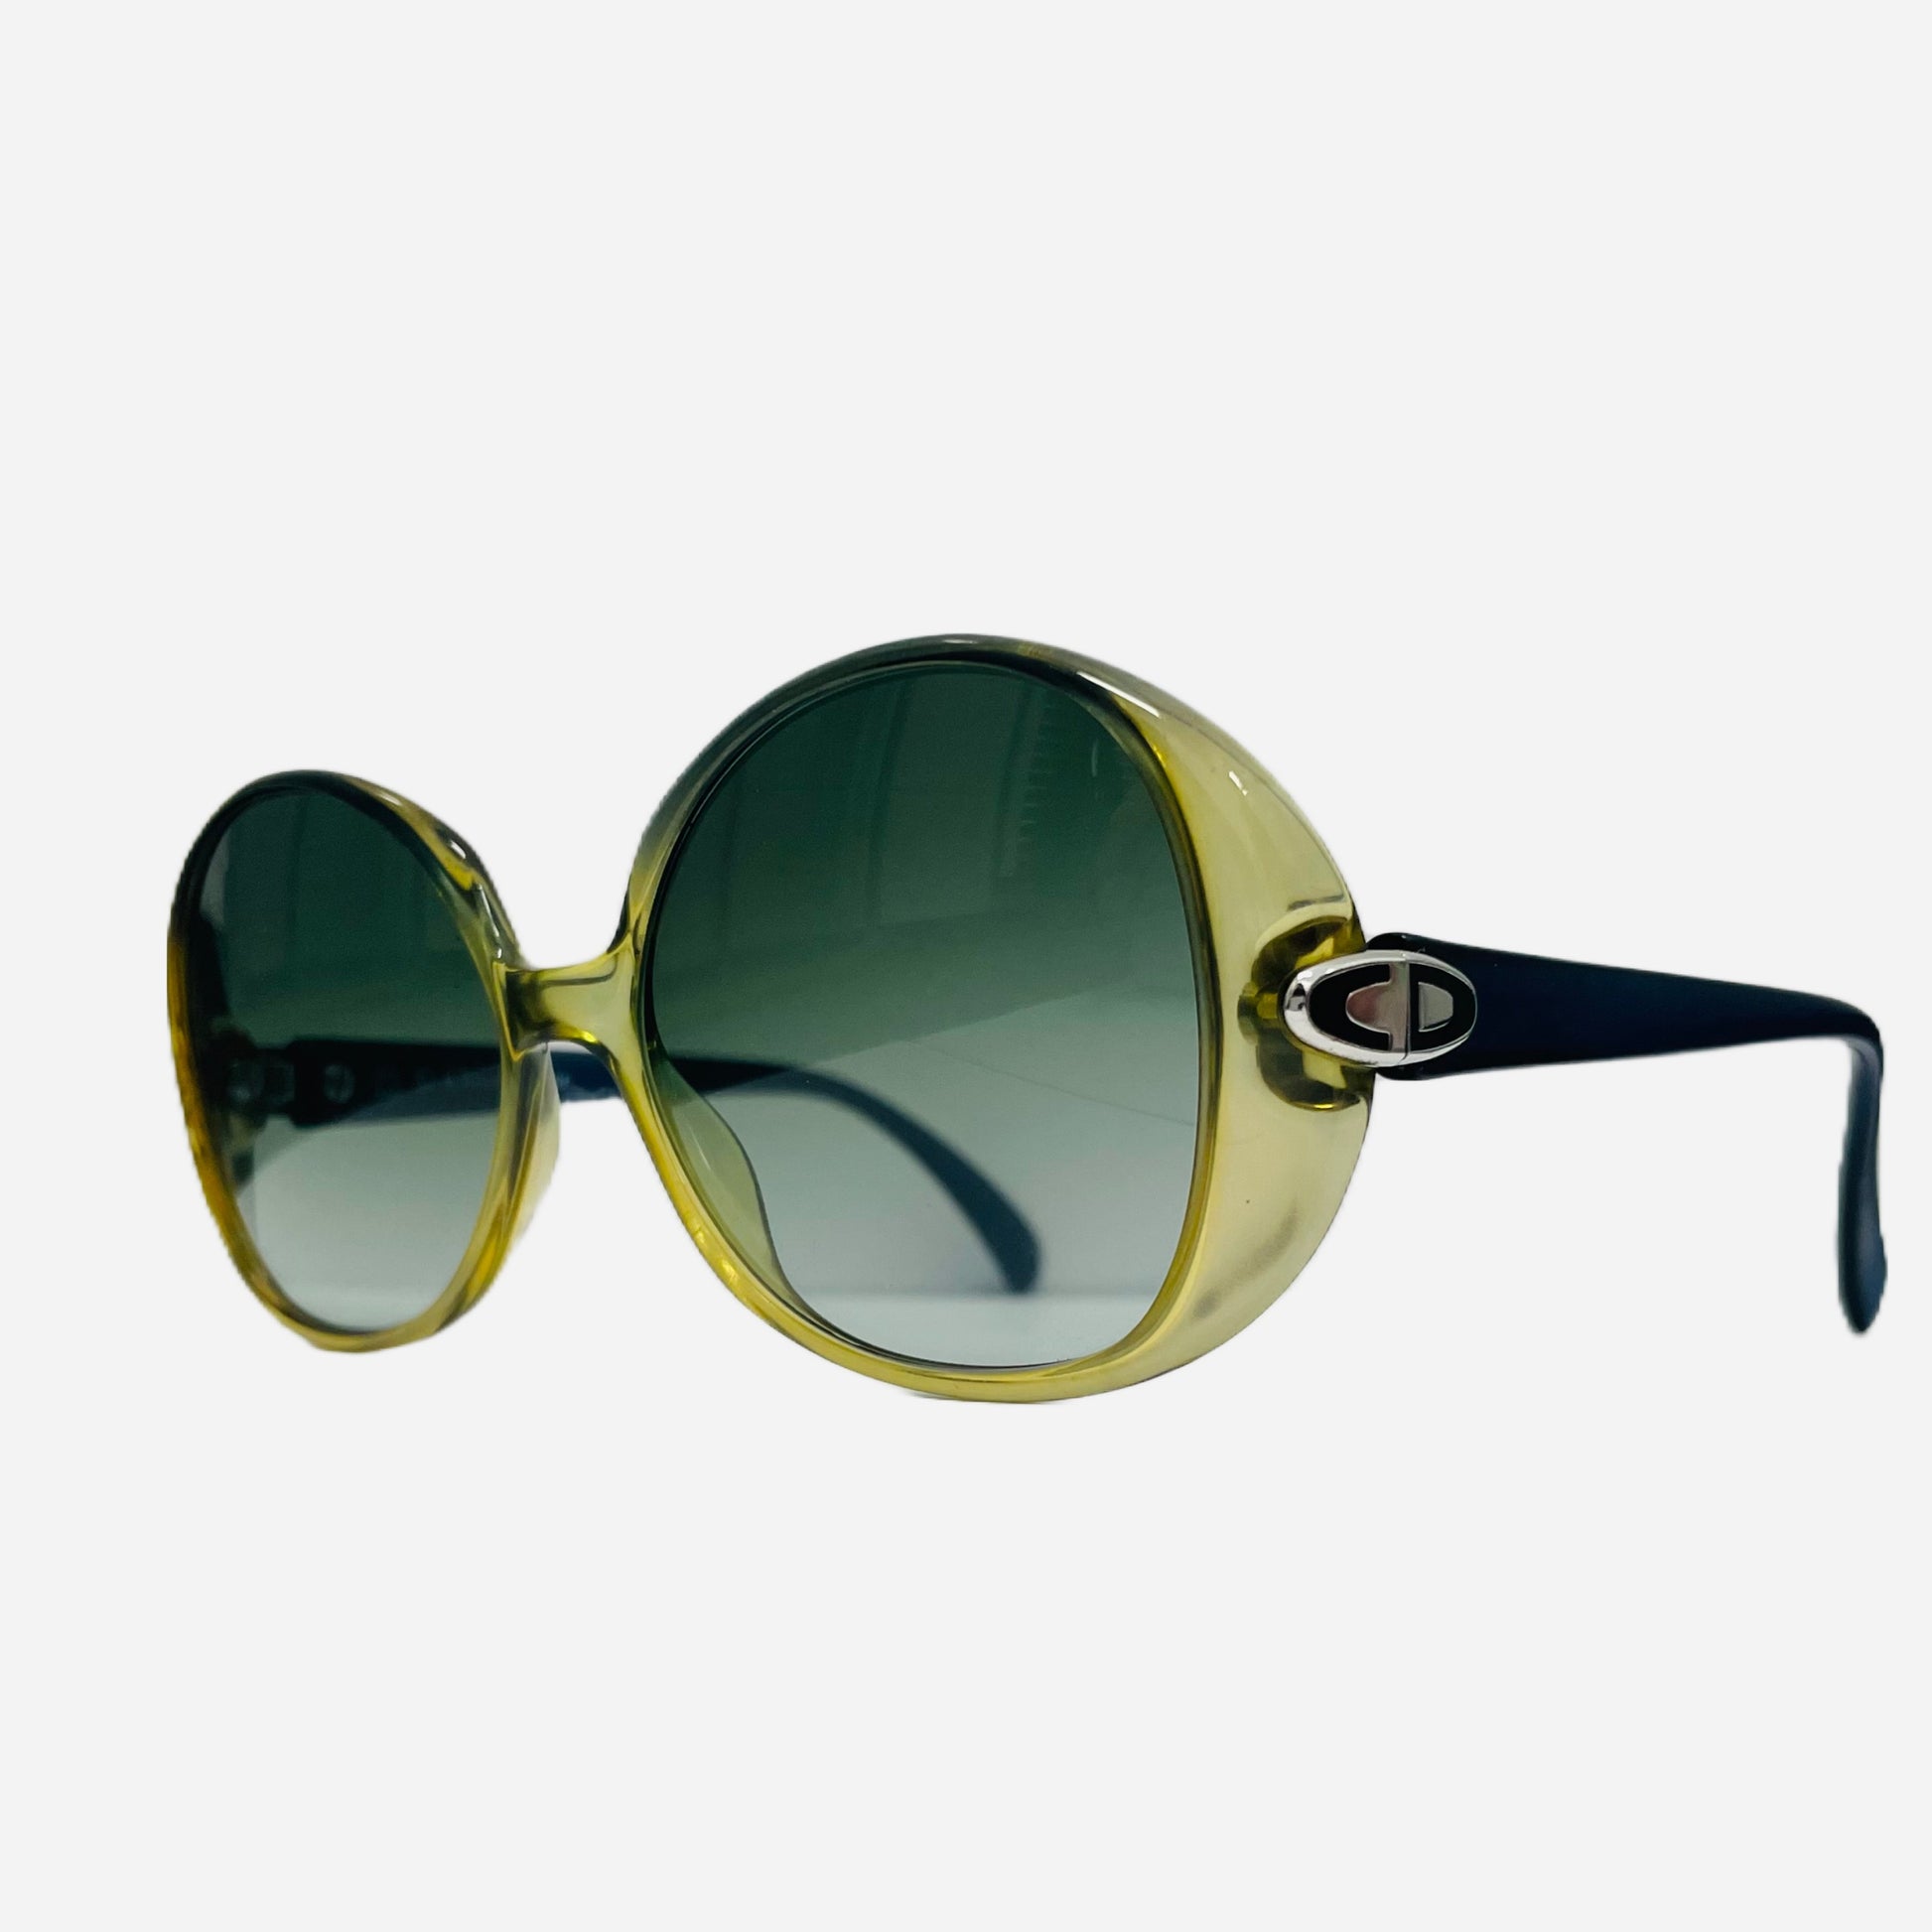 Vintage-Christian-Dior-Sonnenbrille-Sonnenbrille-2049-Optyl-the-seekers-front-side-2